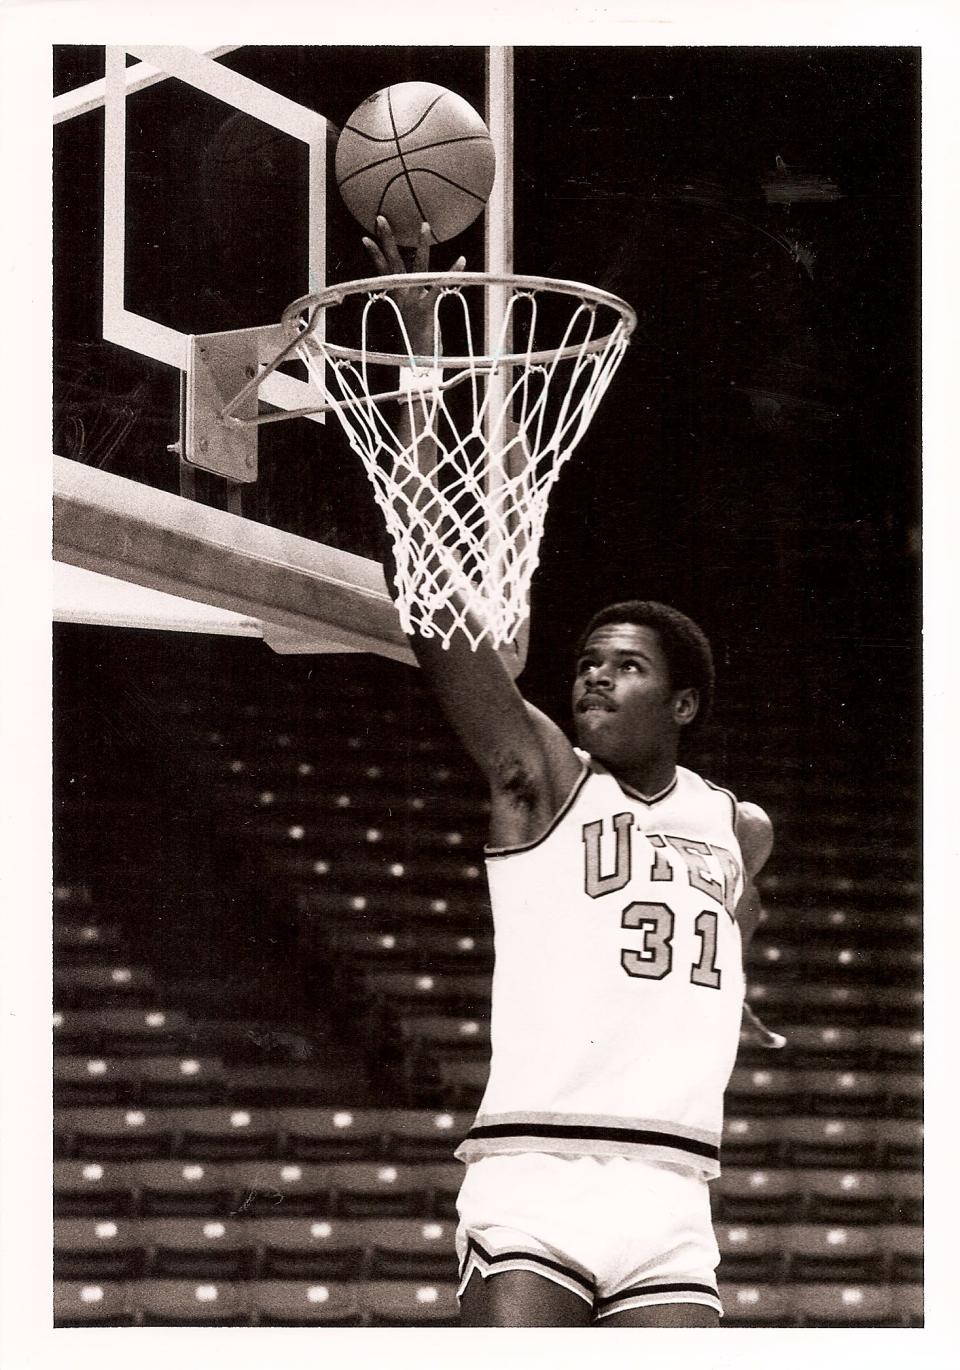 Former UTEP men's basketball player Fred Reynolds will be inducted into the UTEP Athletics Hall of Fame later this year.